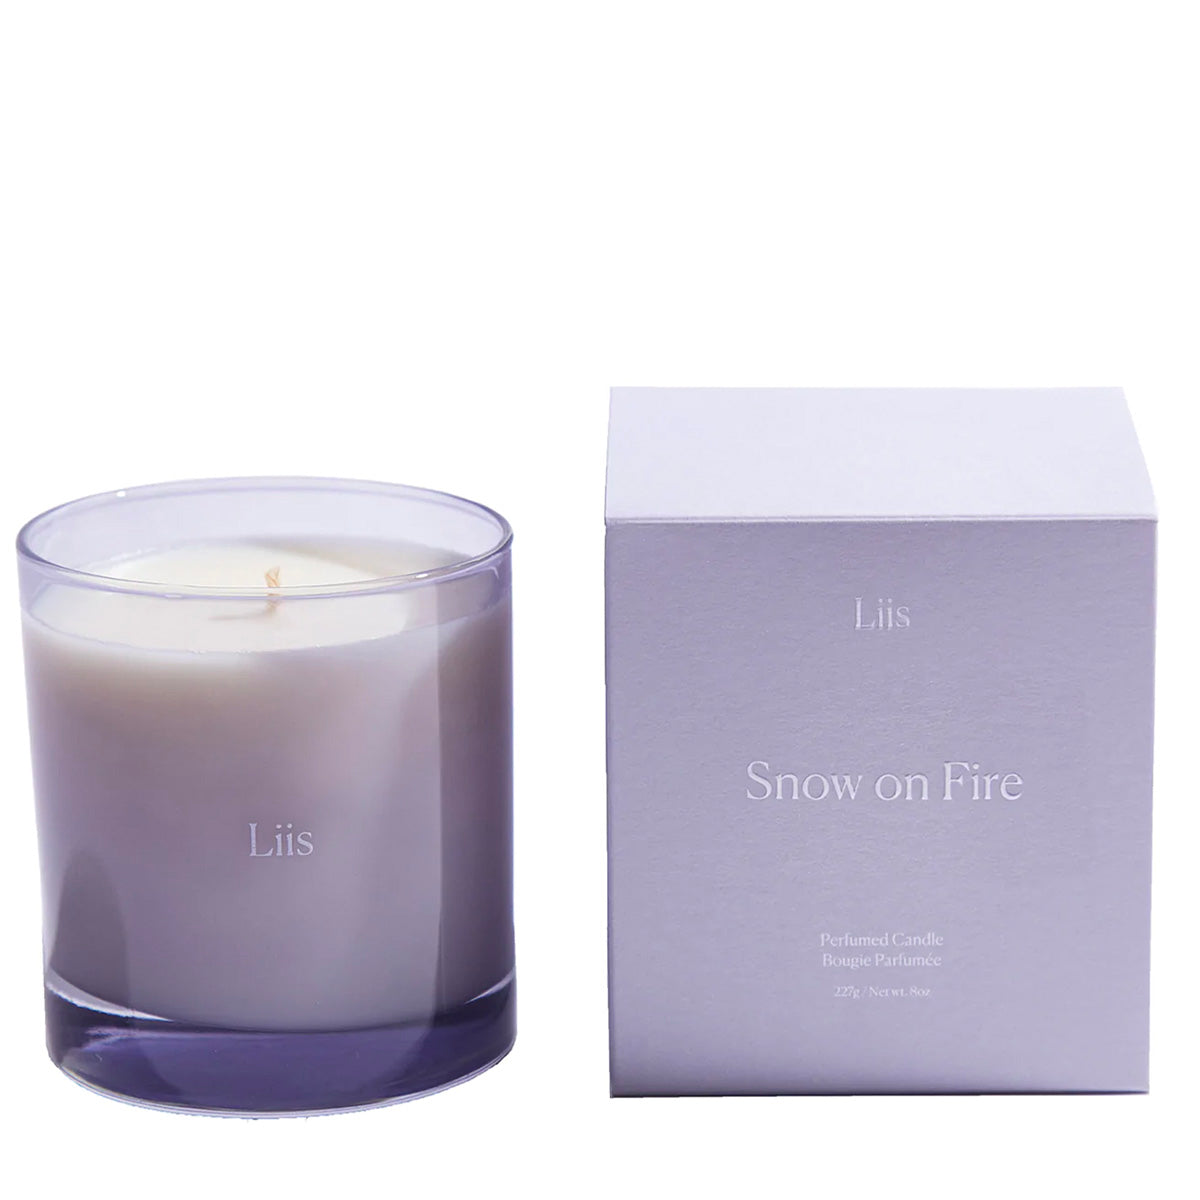 Snow on Fire candle by Liis at Indigo Perfumery